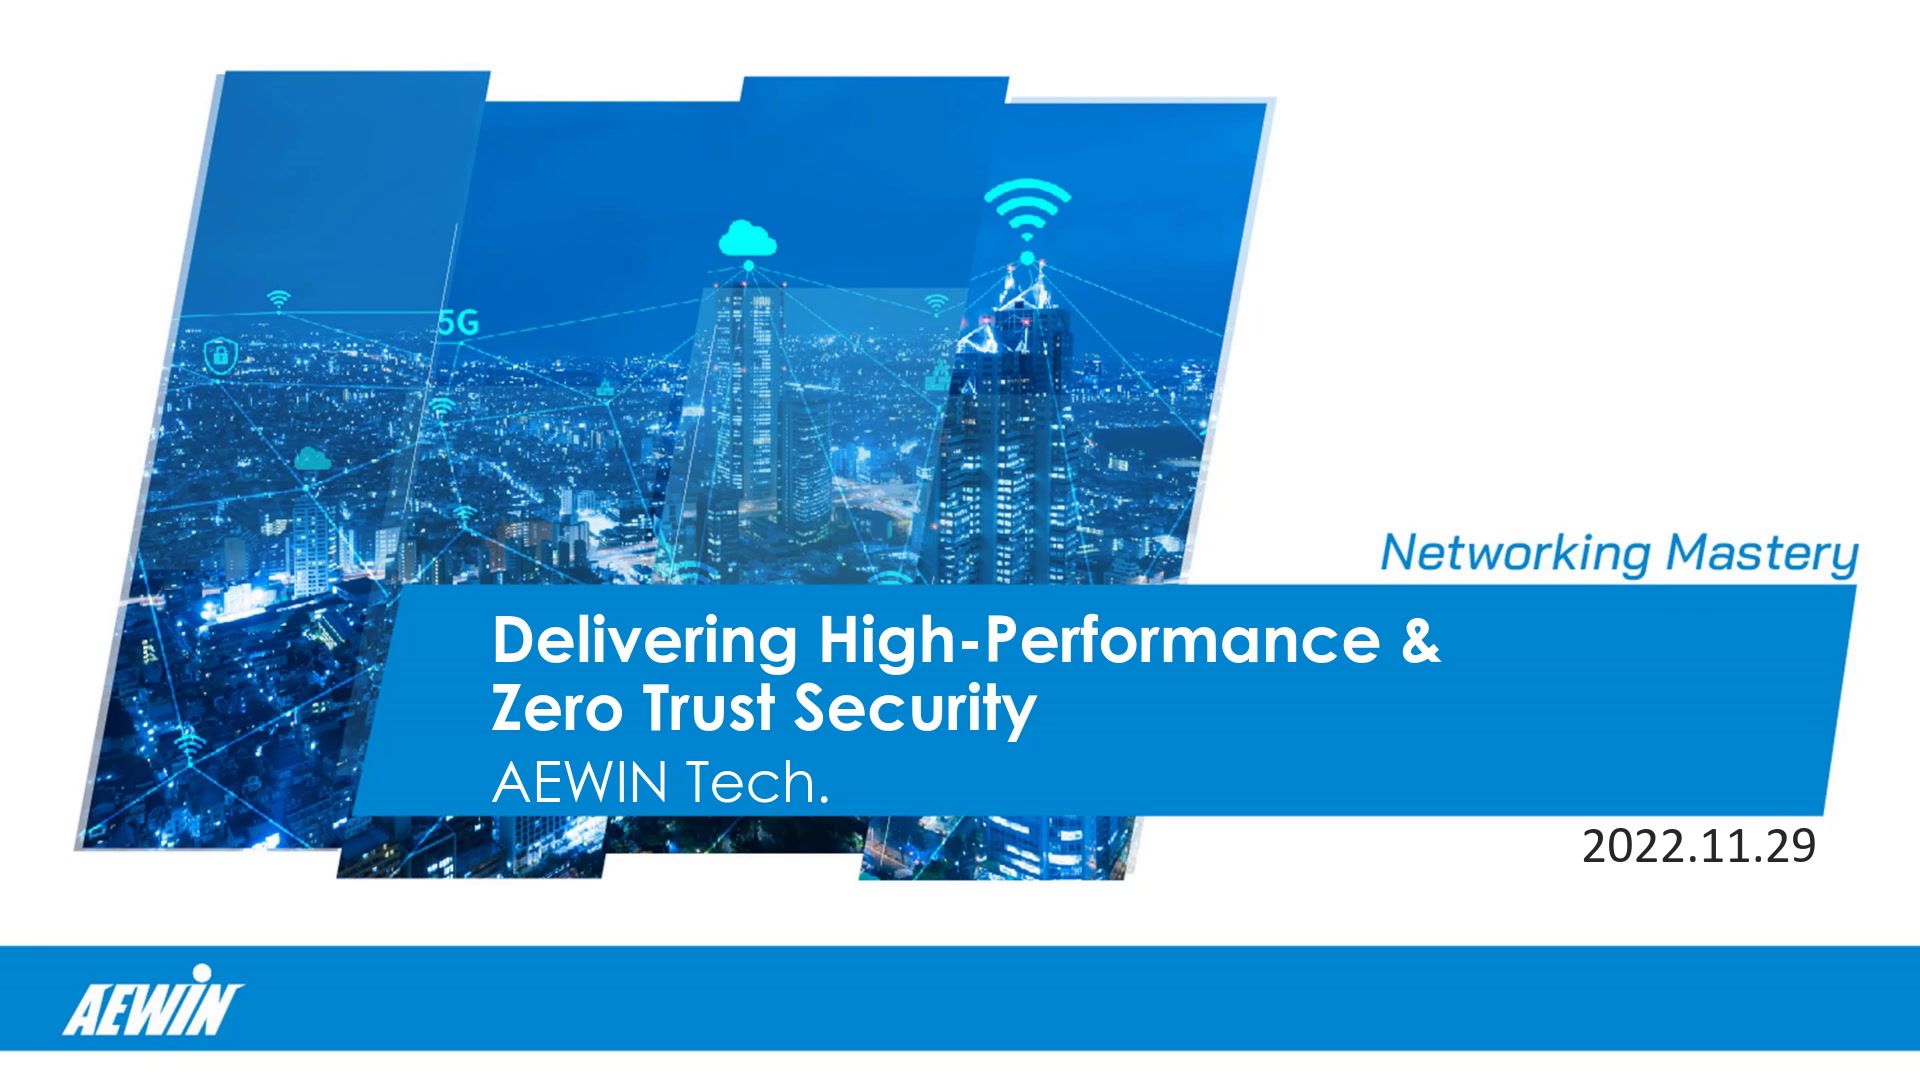 Delivering High-Performance & Zero-Trust Security